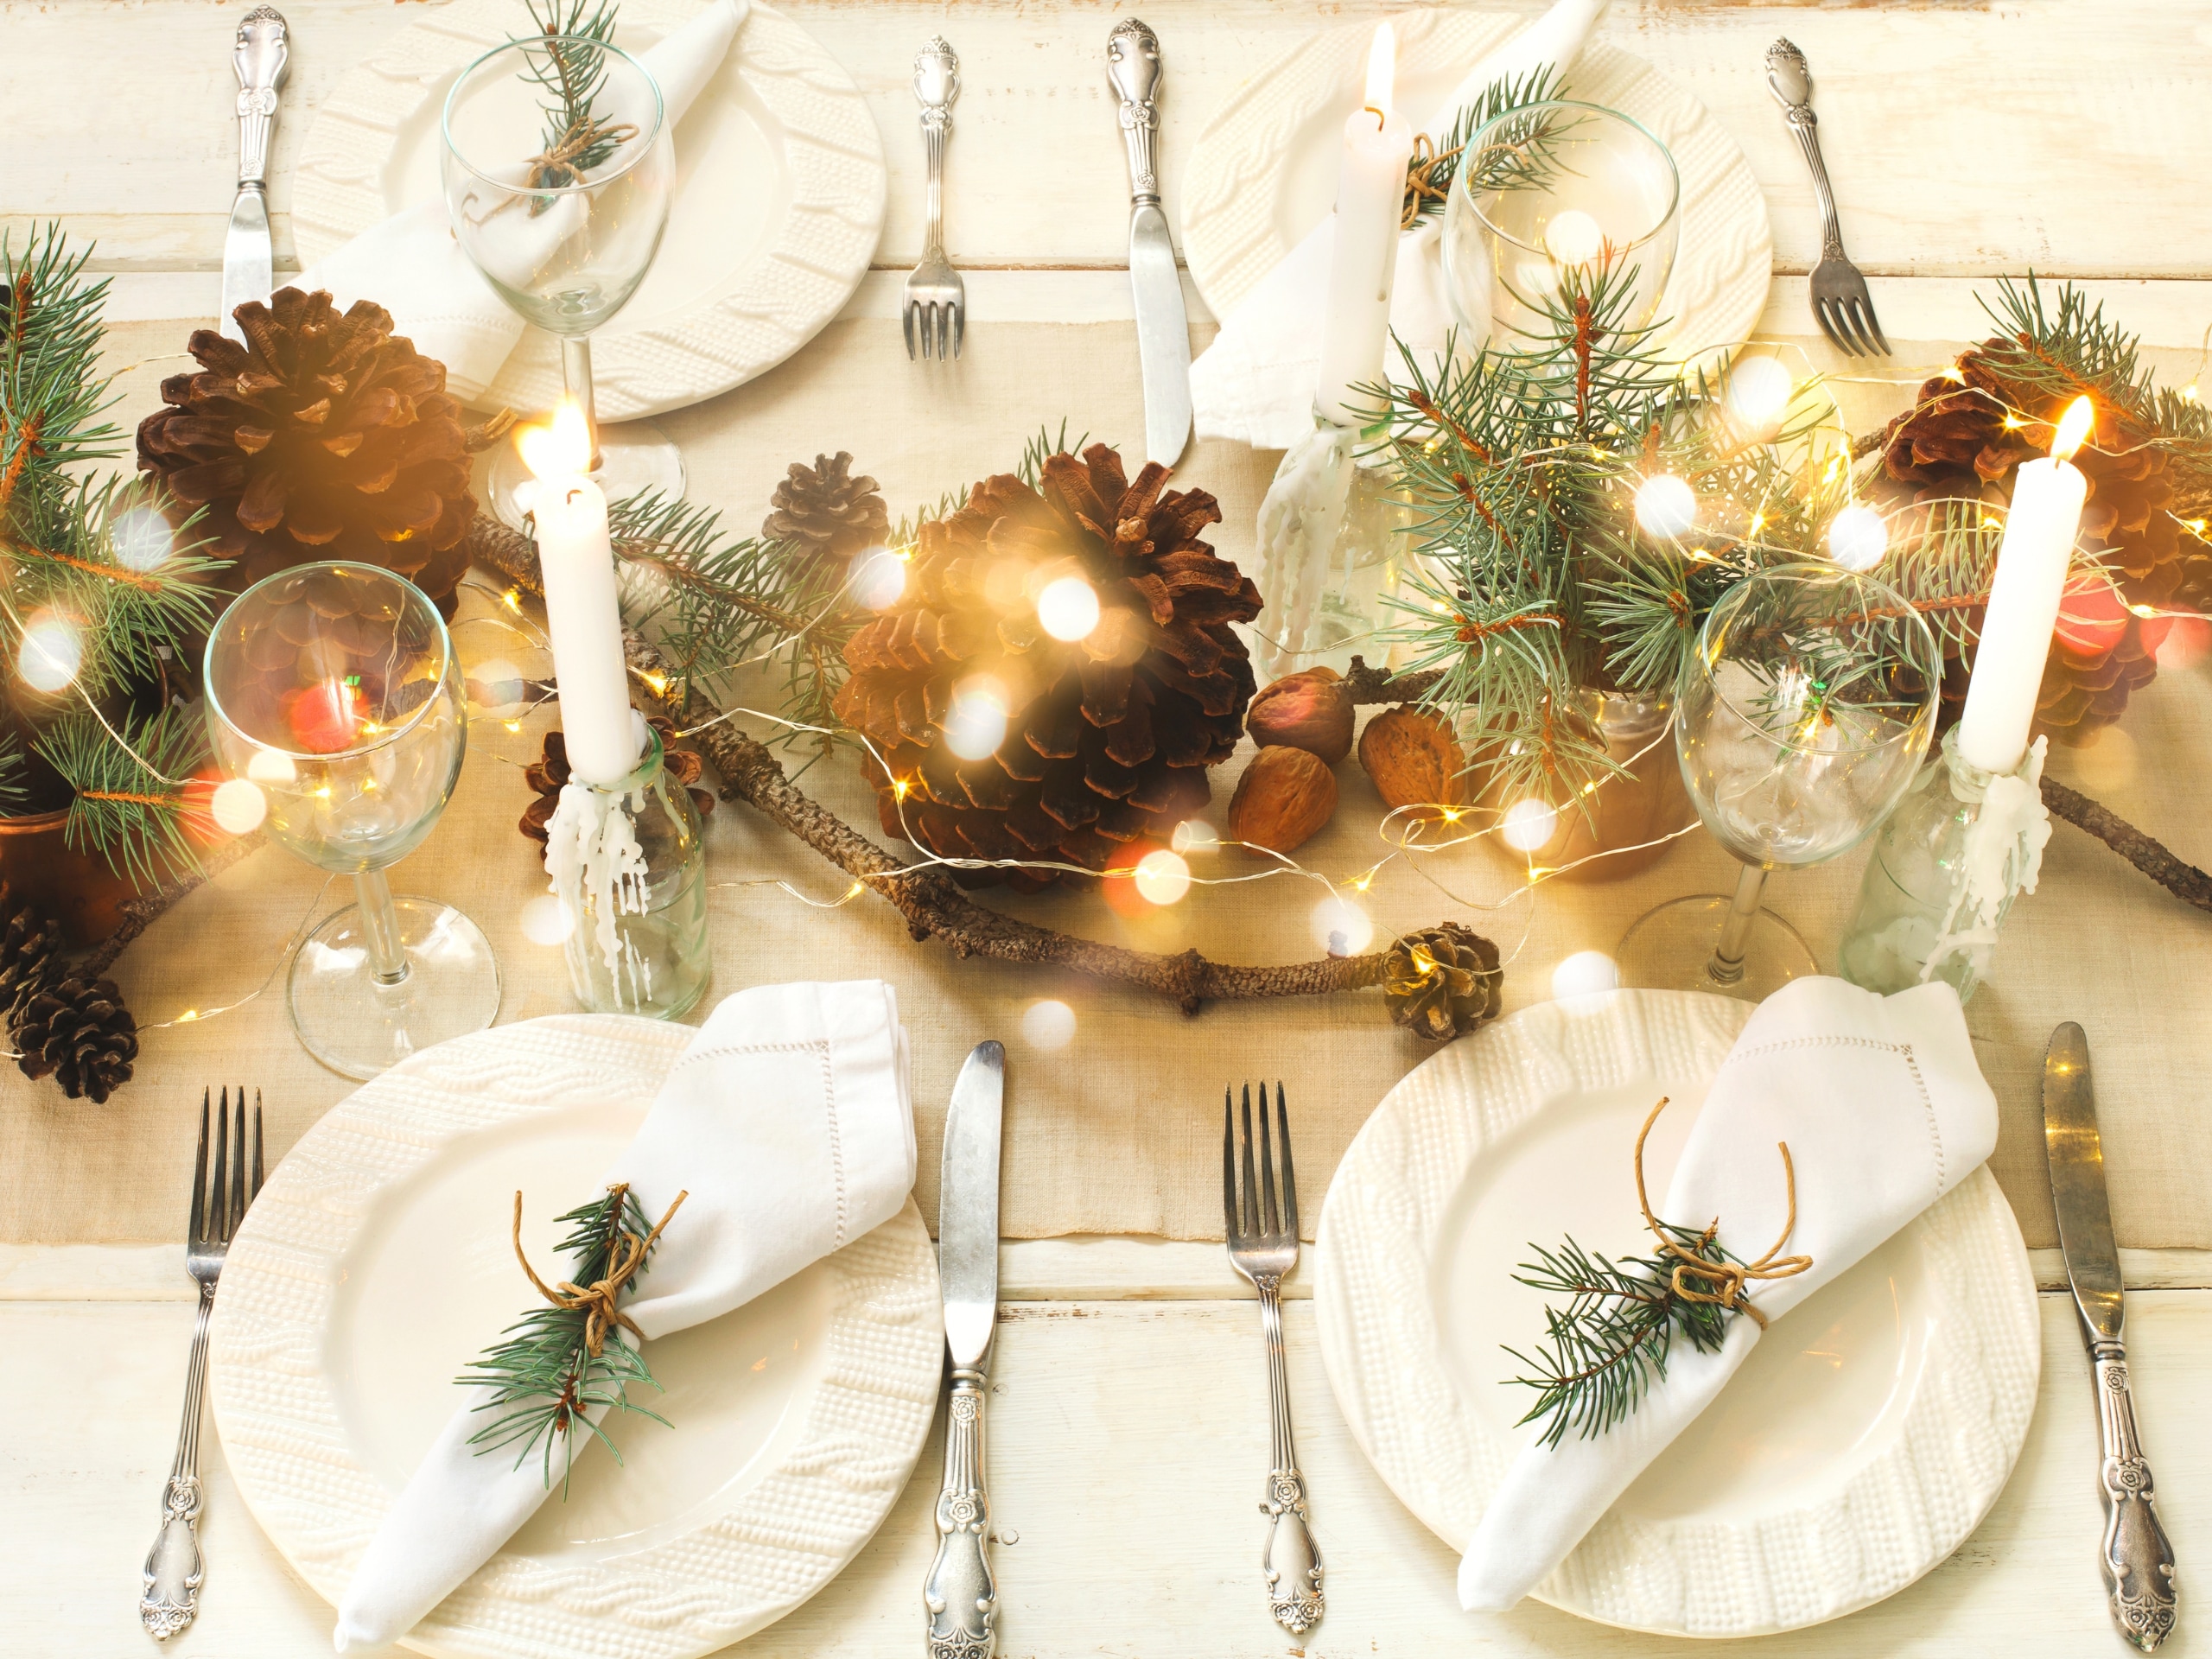 Australian inspired Christmas festive table styling | Eclectic Creative